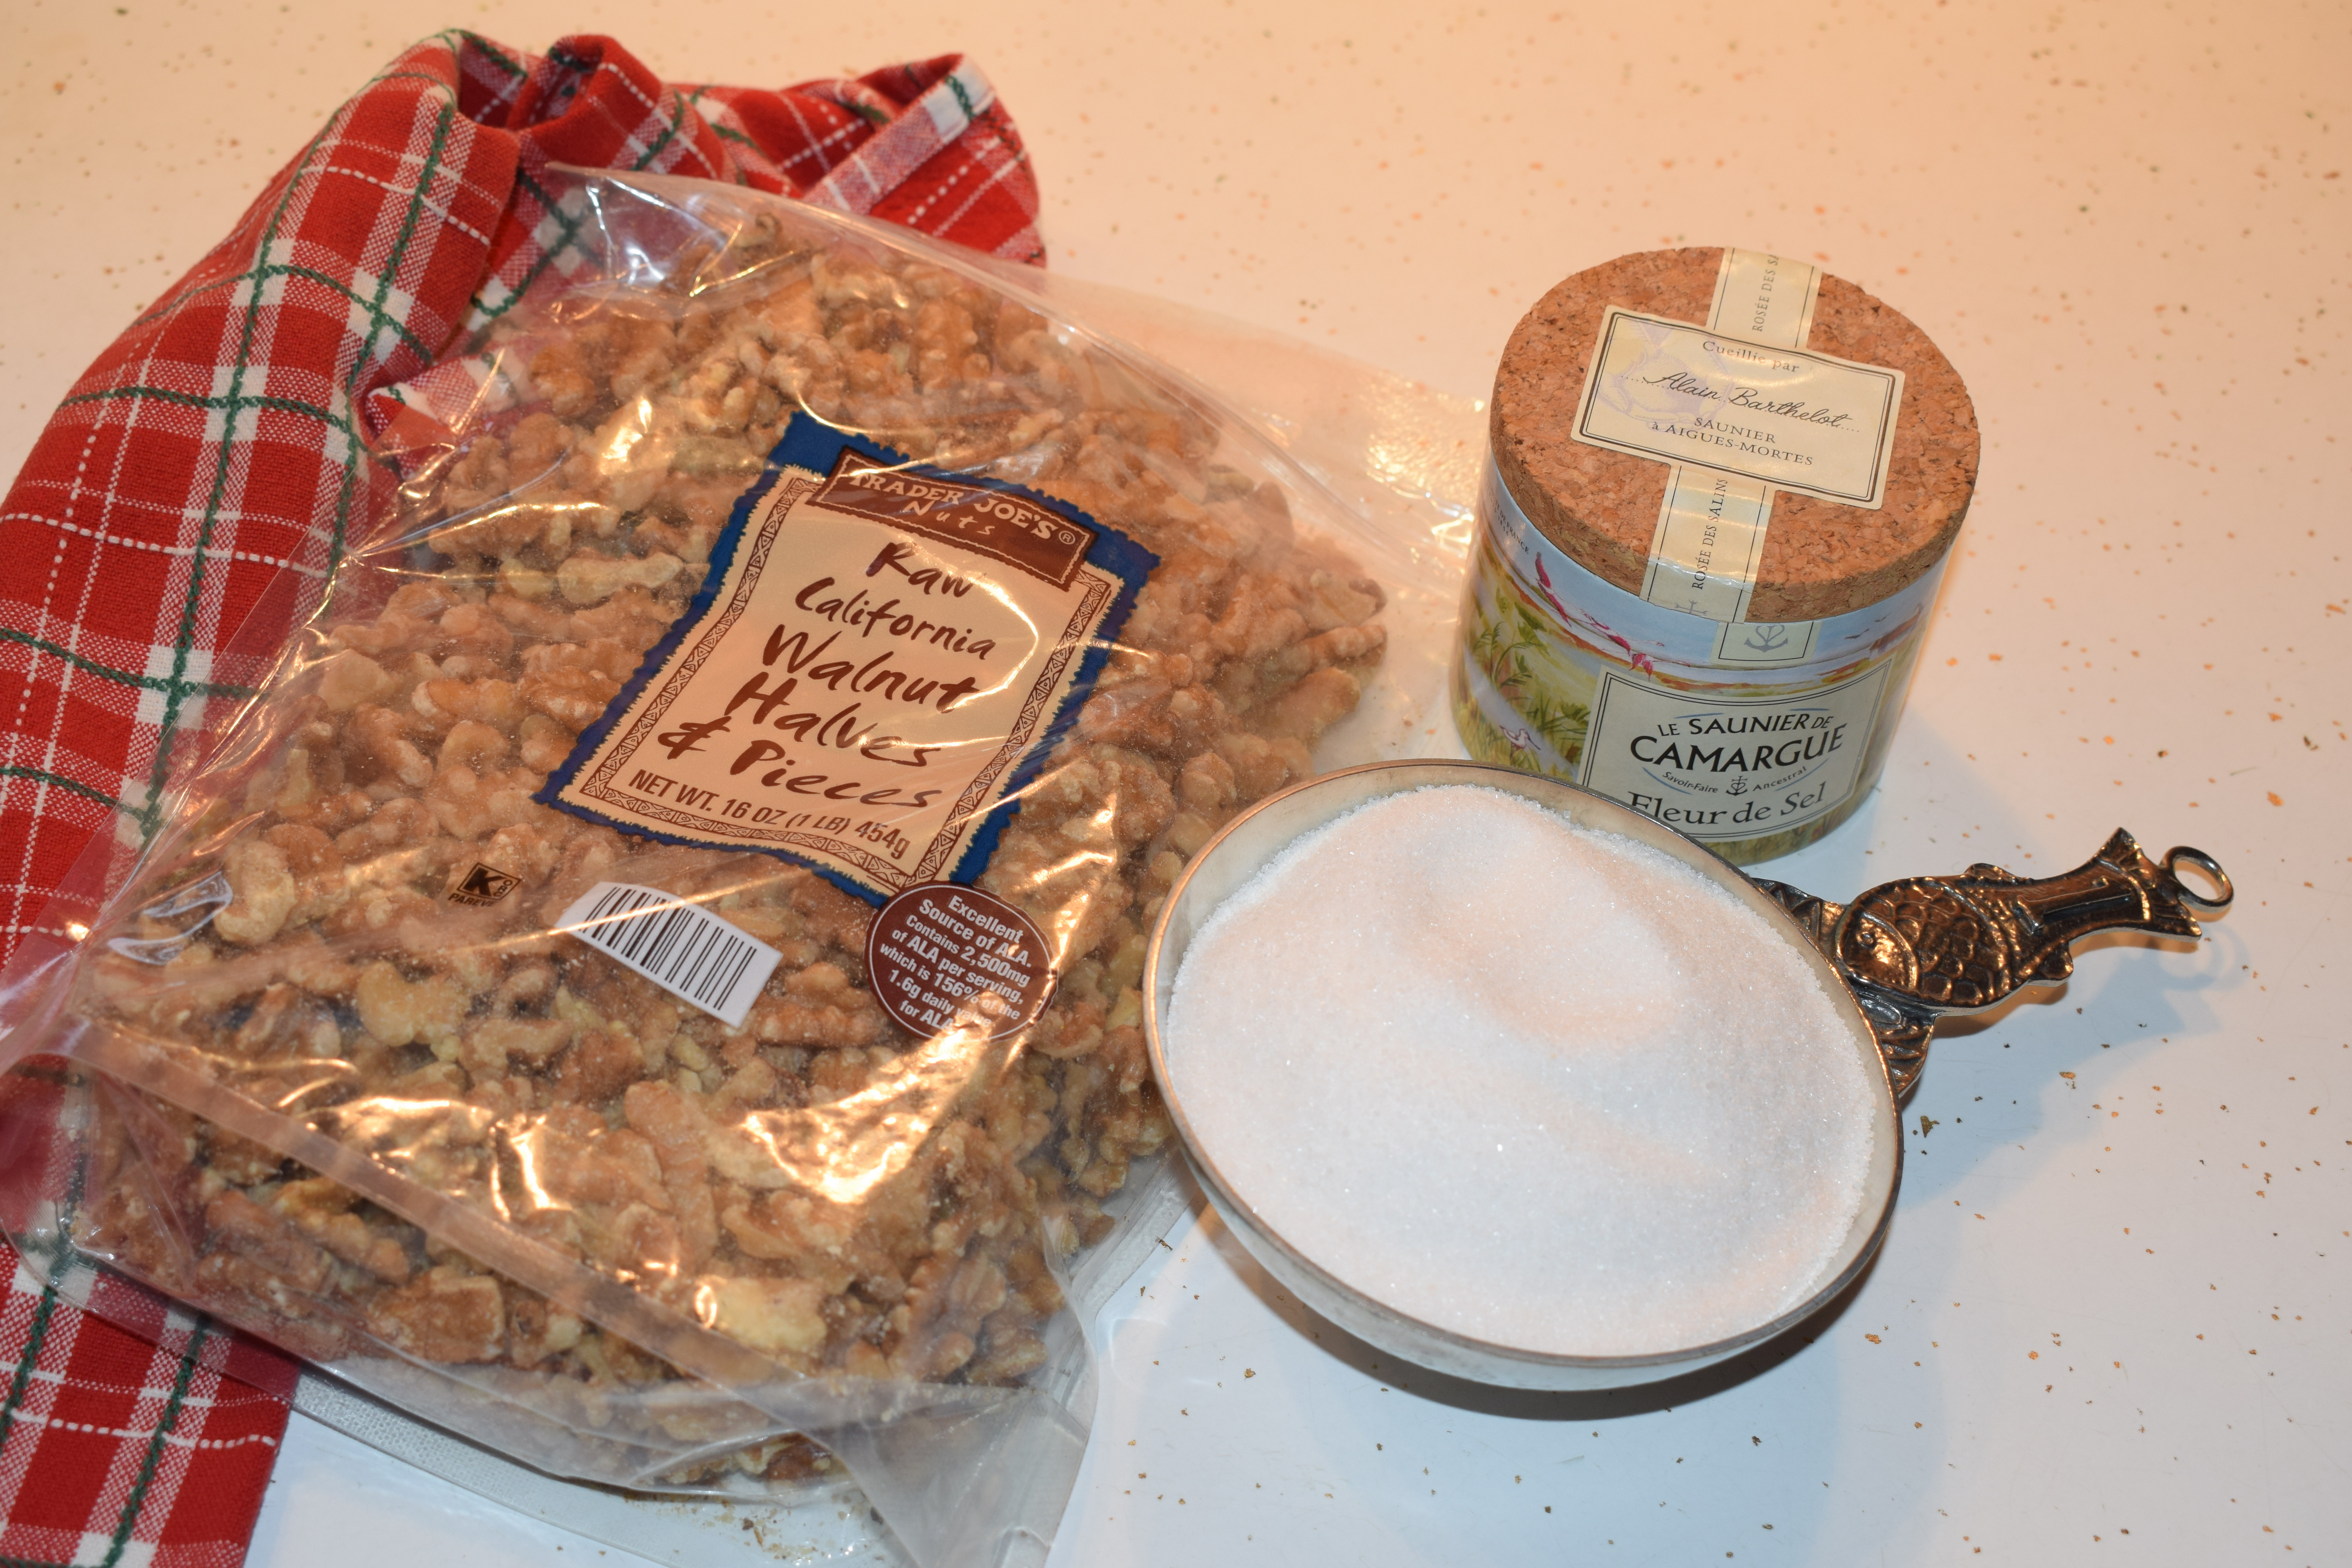 Ingredients for Sweet and Salty Walnuts Recipe